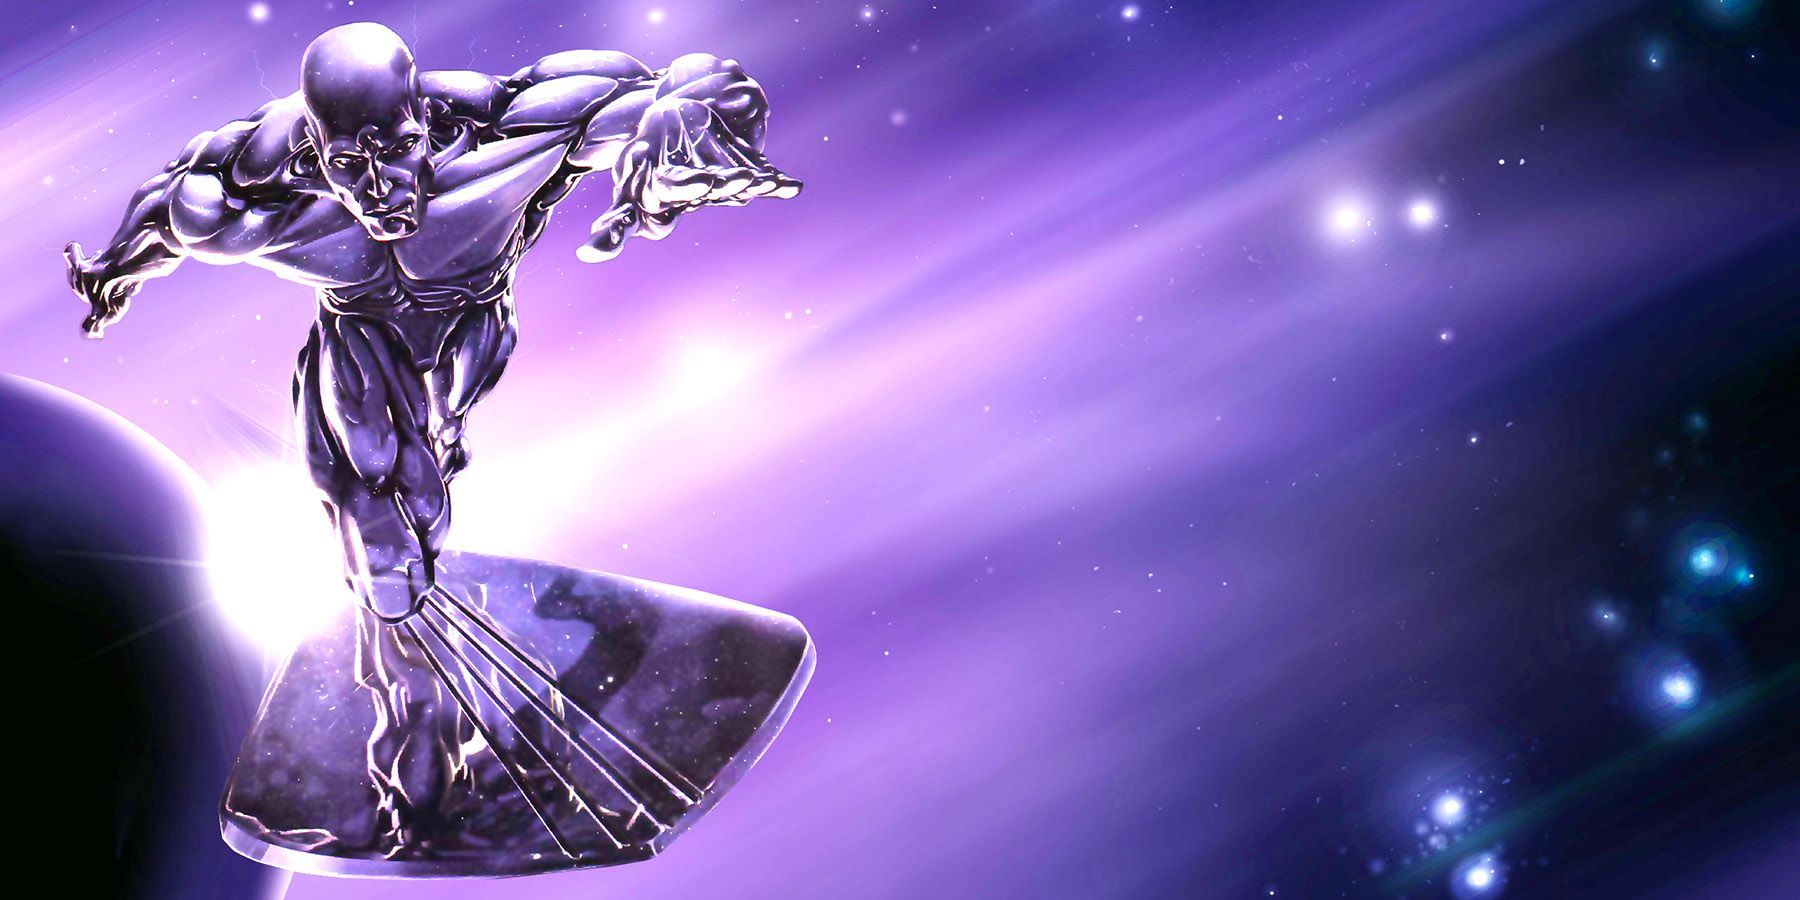 Silver Surfer flies through the cosmos in Marvel Comics